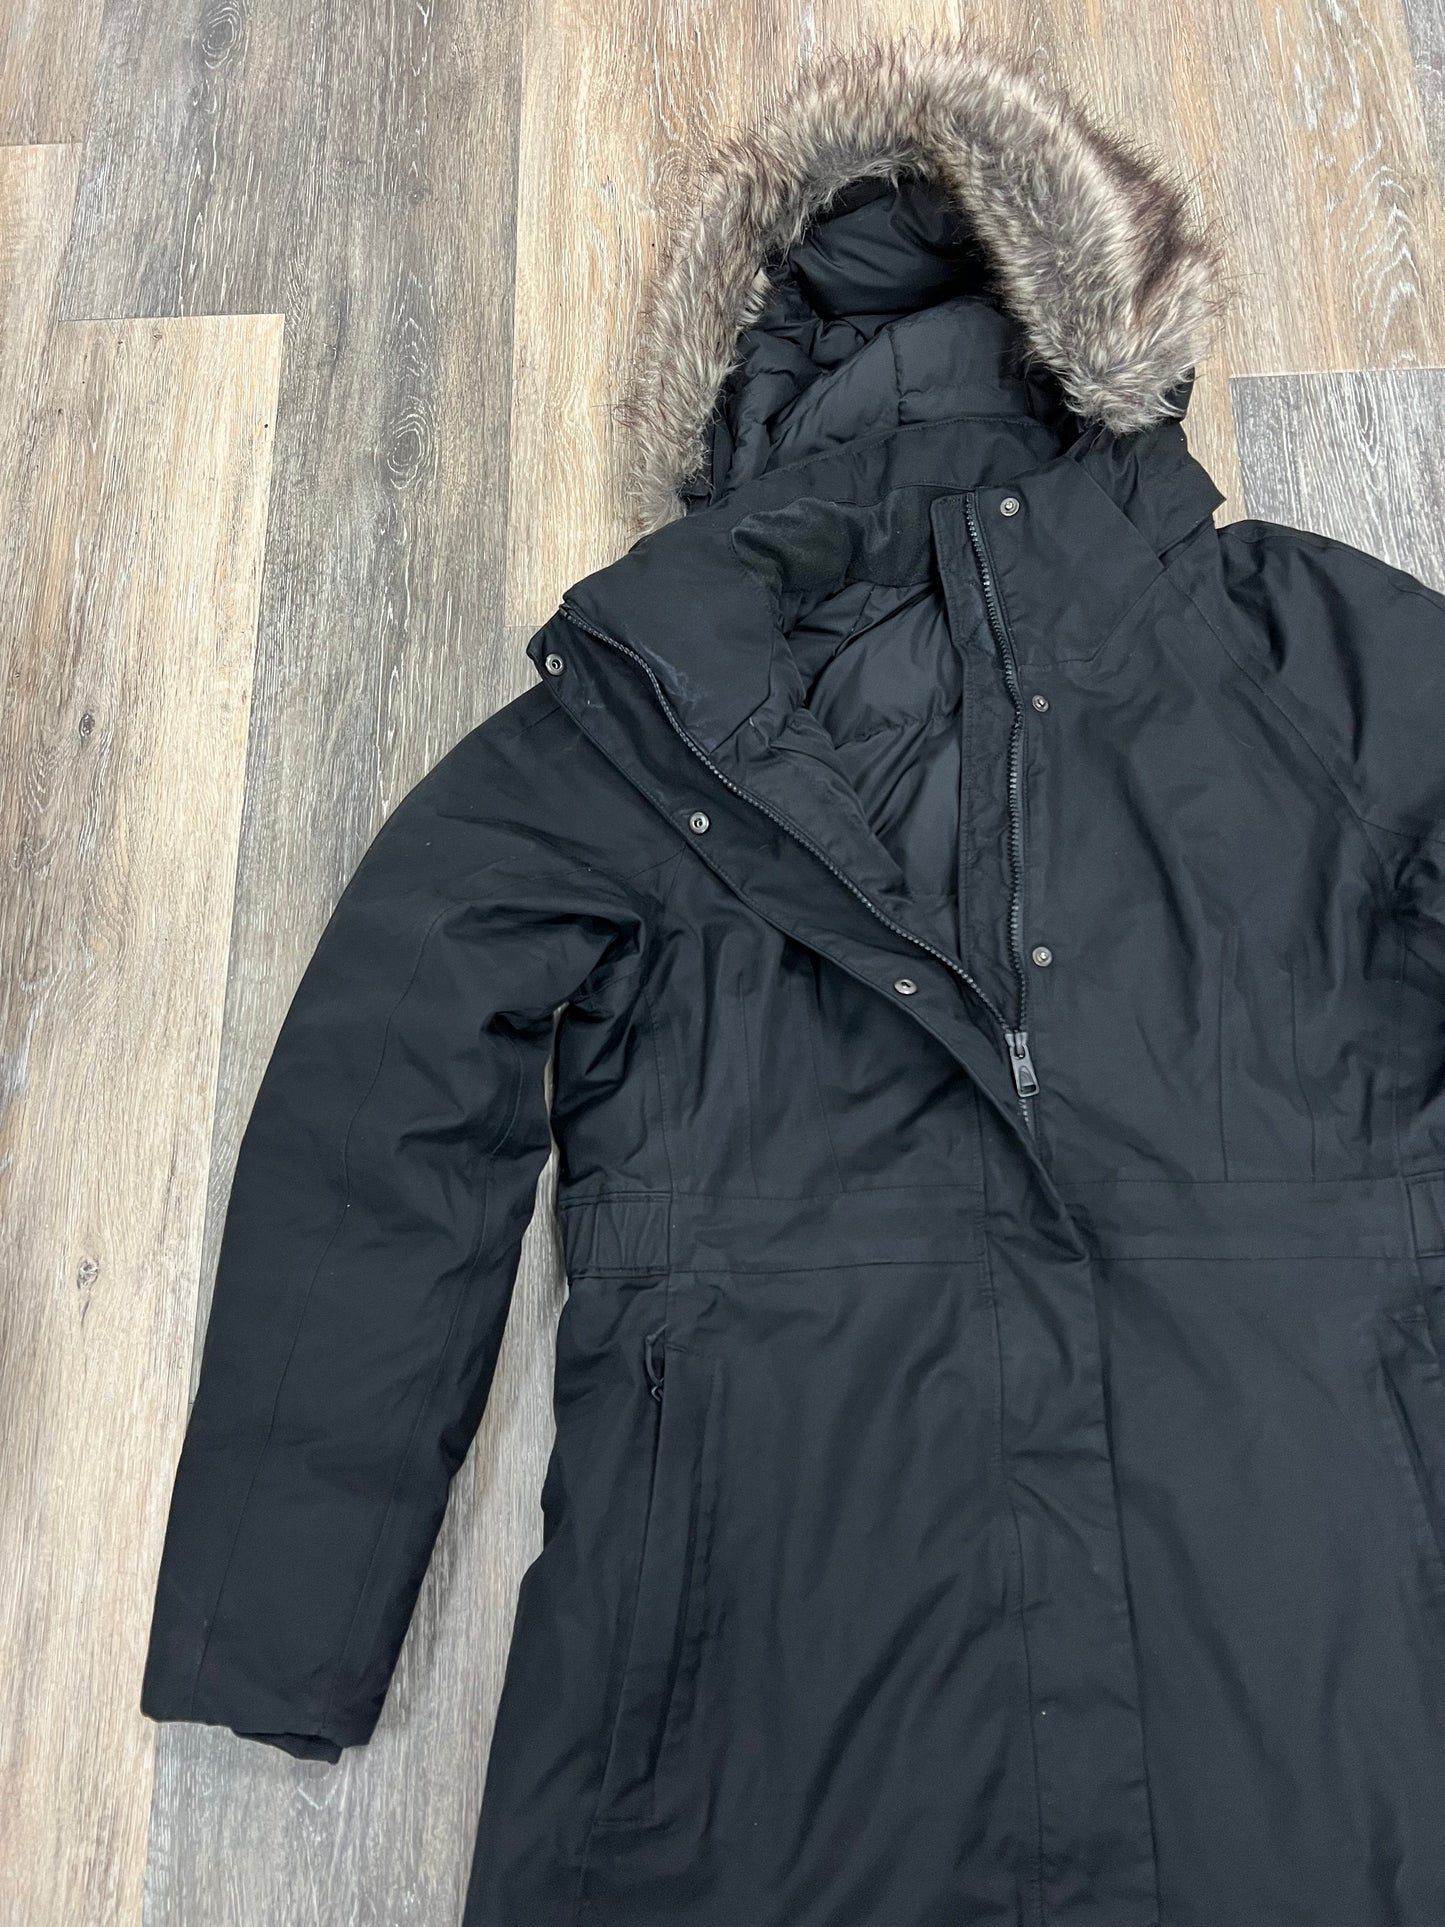 Coat Parka By North Face  Size: Xl